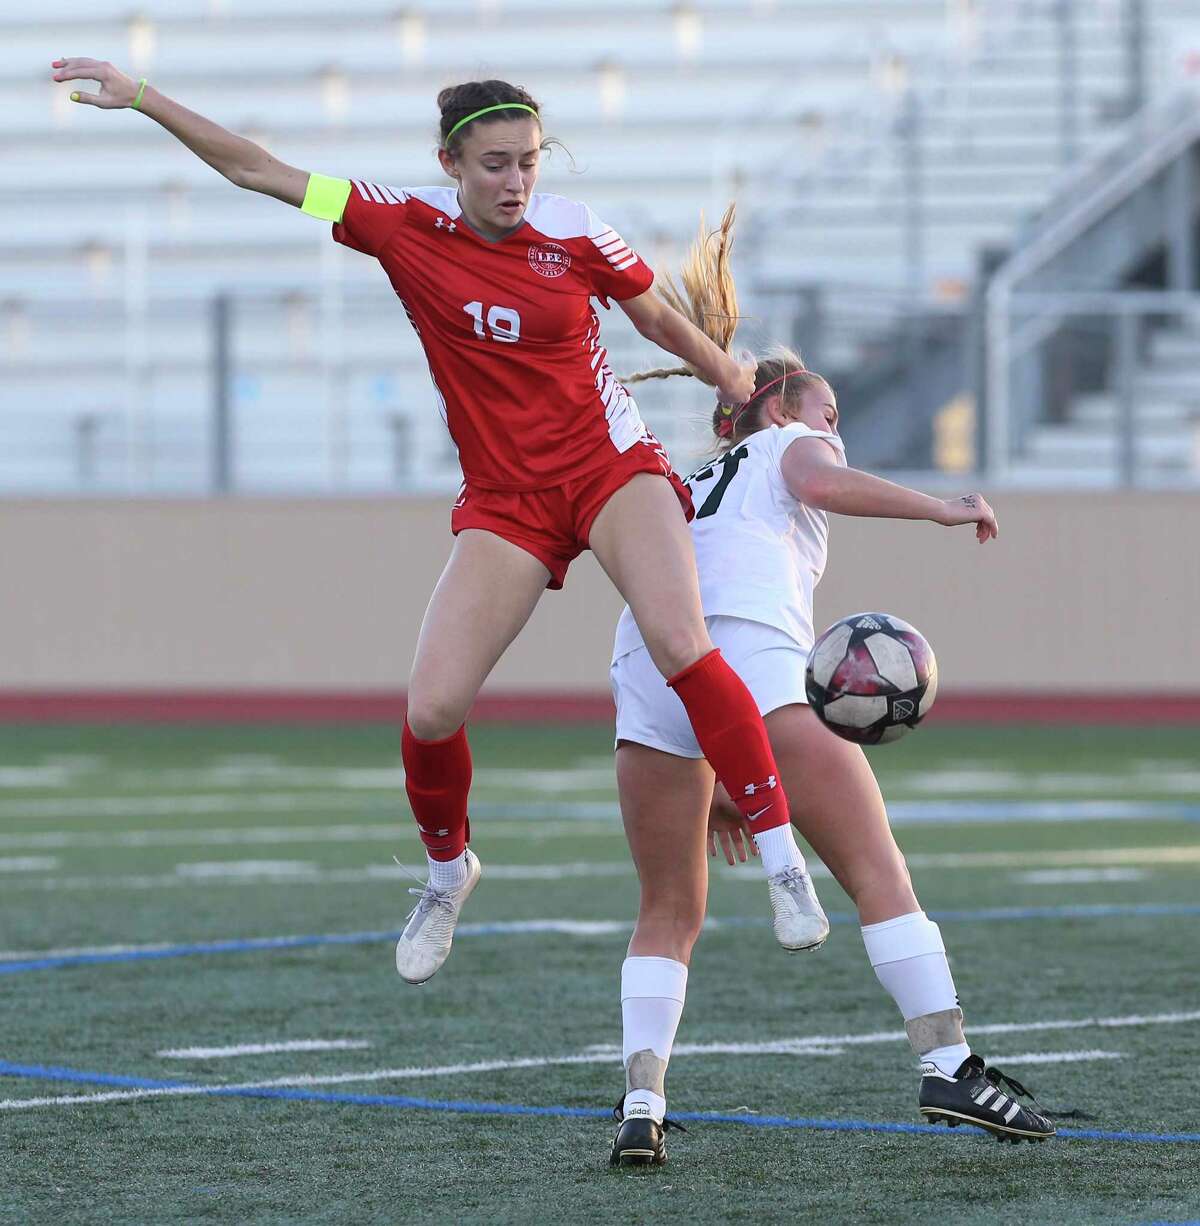 LEE's Jenevieve Jackson (19) and Reagan's Emma O'Brien (17) compete for the ball during their girls soccer game at Commander Stadium on Wednesday, Feb. 12, 2020. LEE defeated Reagan, 1-0.